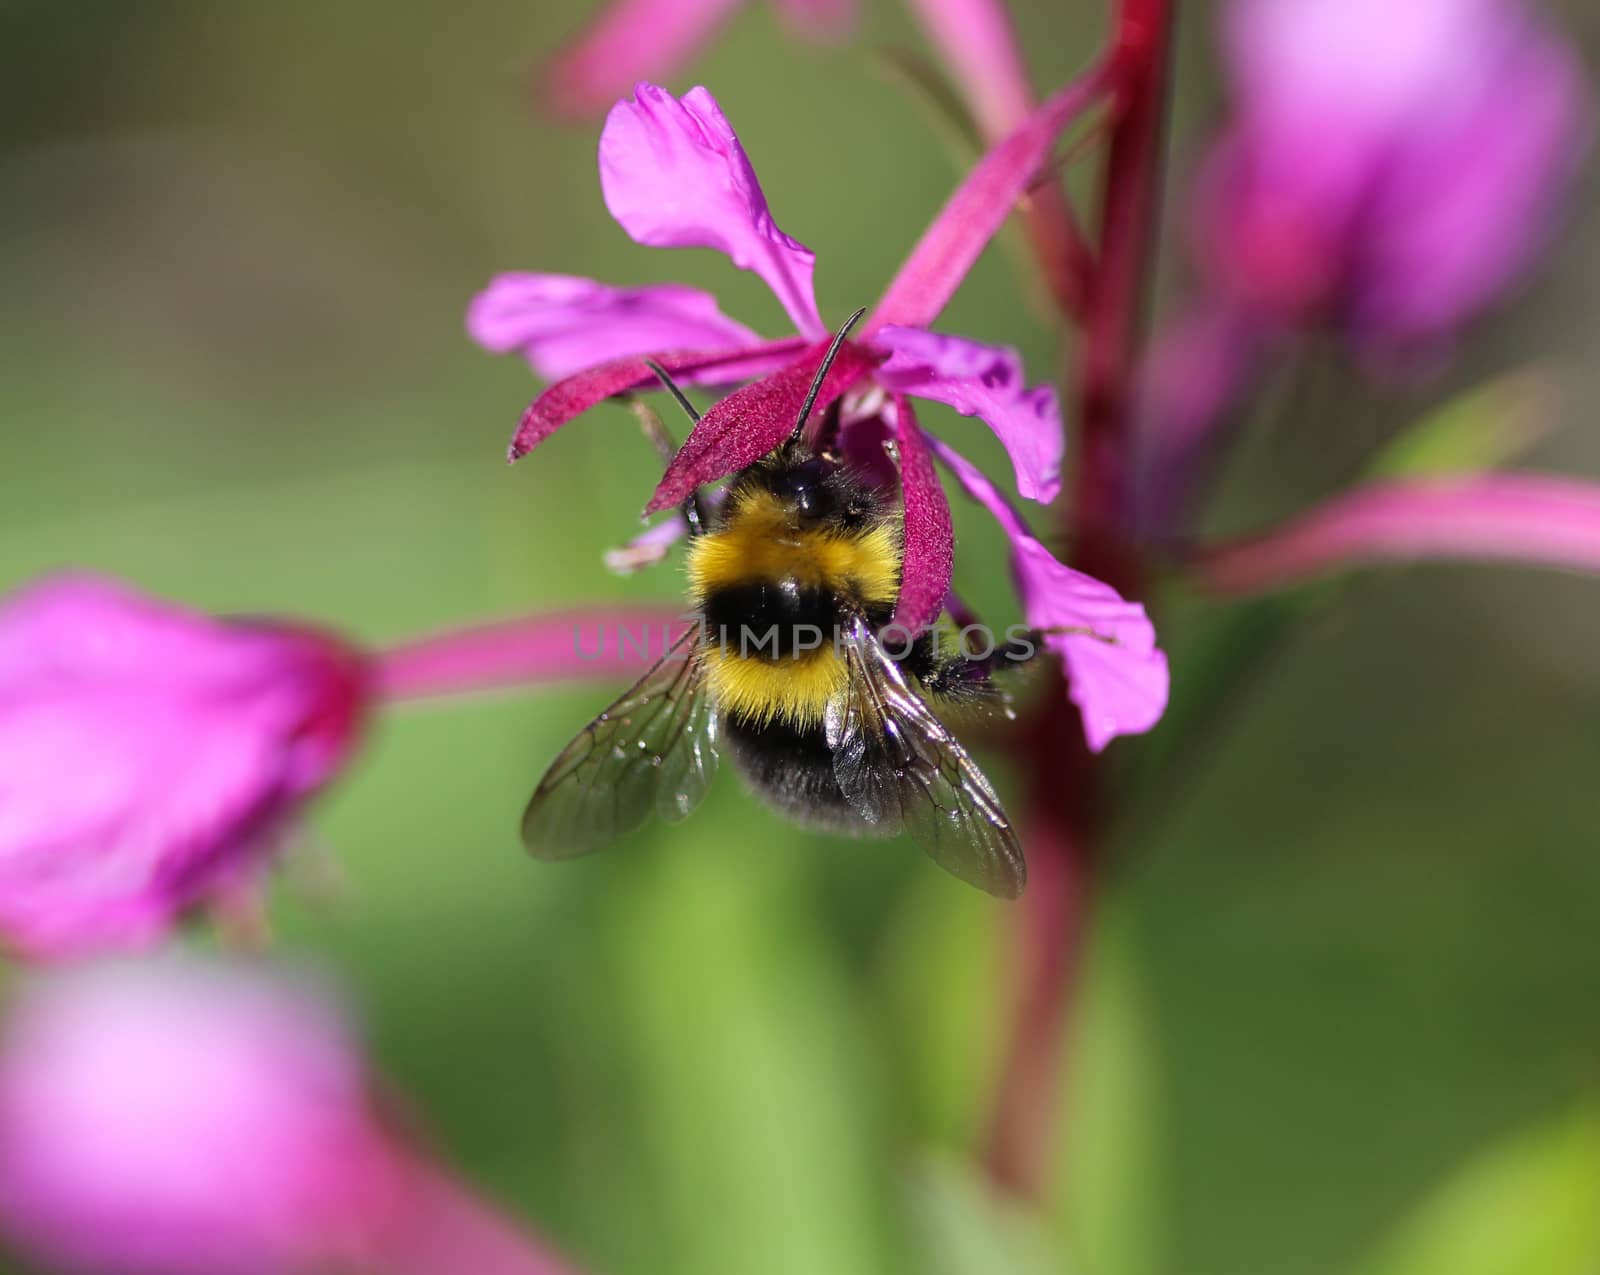 Close up of Bombus bohemicus, also known as the gypsy's cuckoo bumblebee